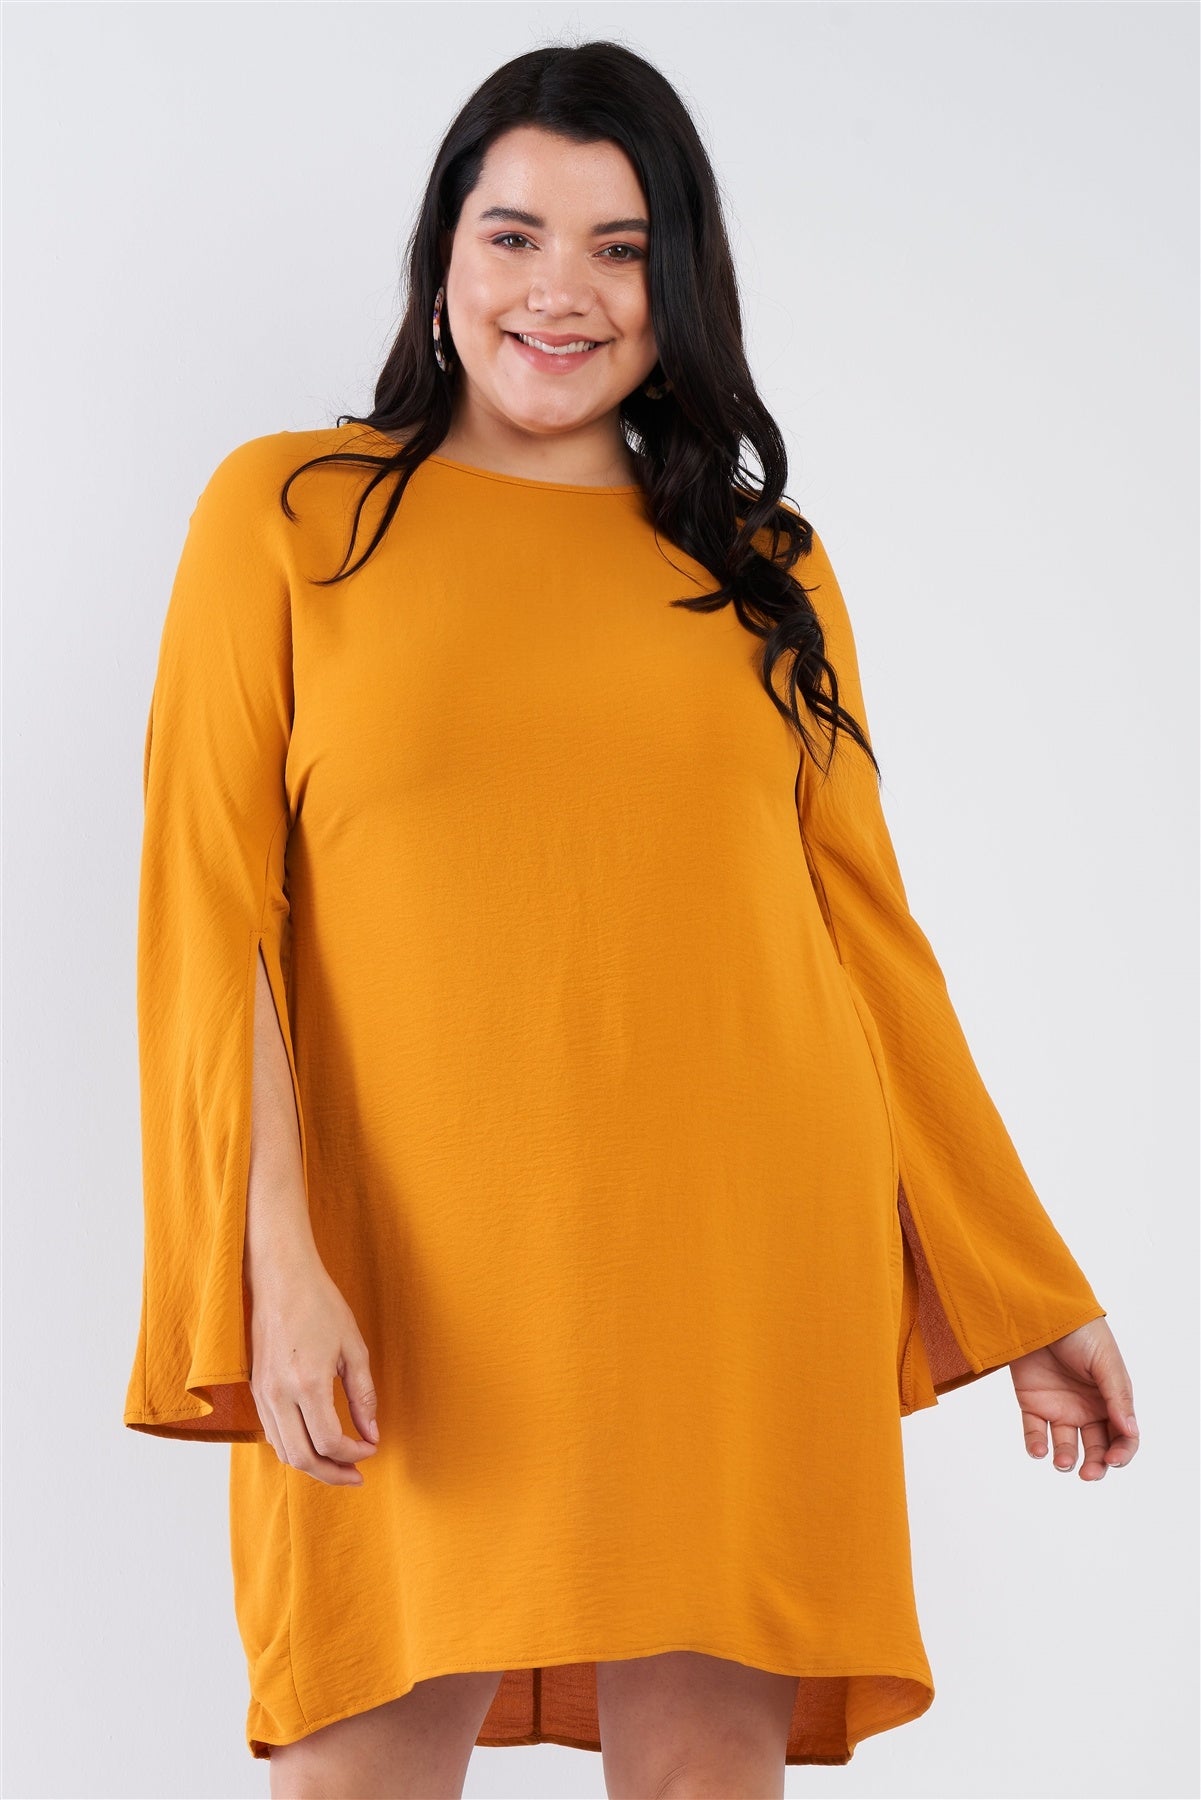 Plus Size Lovely Ladies Made In U.S.A. 97% Polyester 3% Spandex Retro Chic Slit Sleeve Detail Scoop Neck Mini Dress (Mustard)